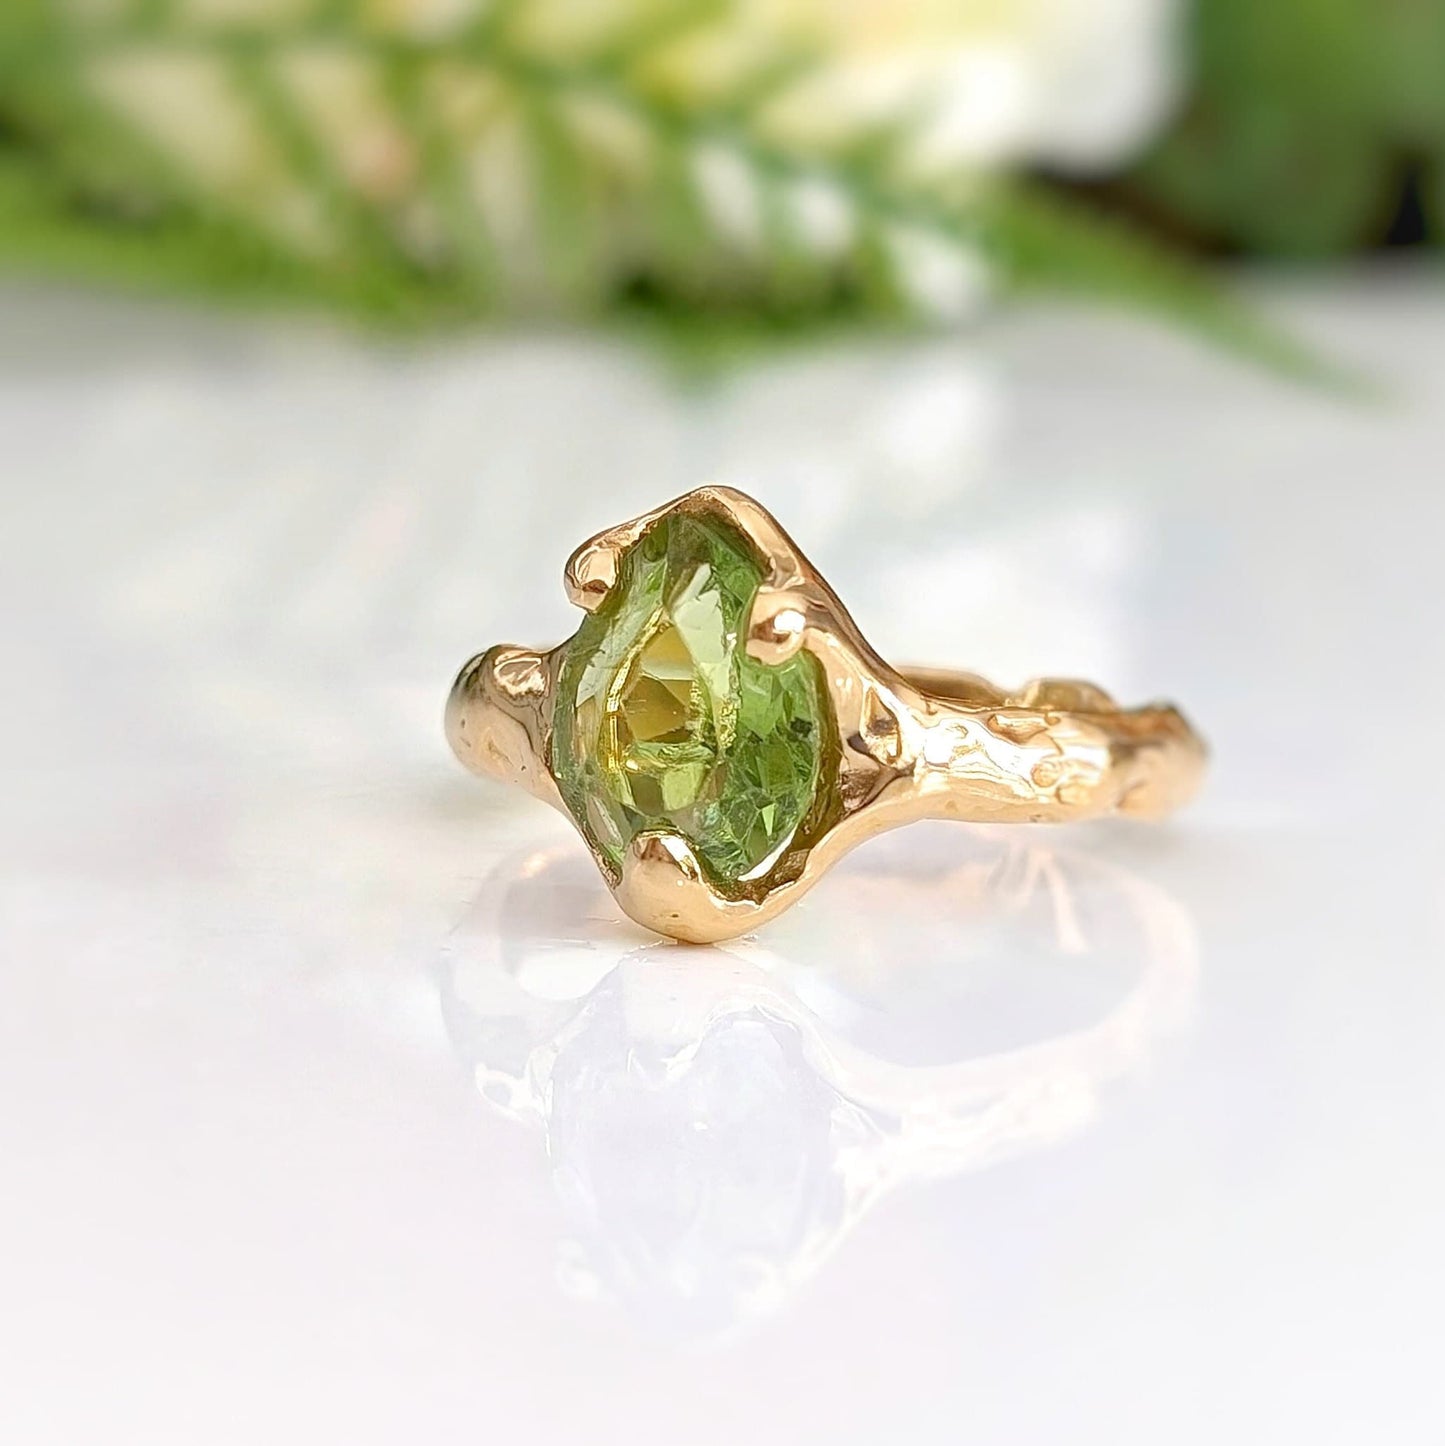 Large Pear shape Peridot set by prongs on a textured Molten Solid 14k Gold band